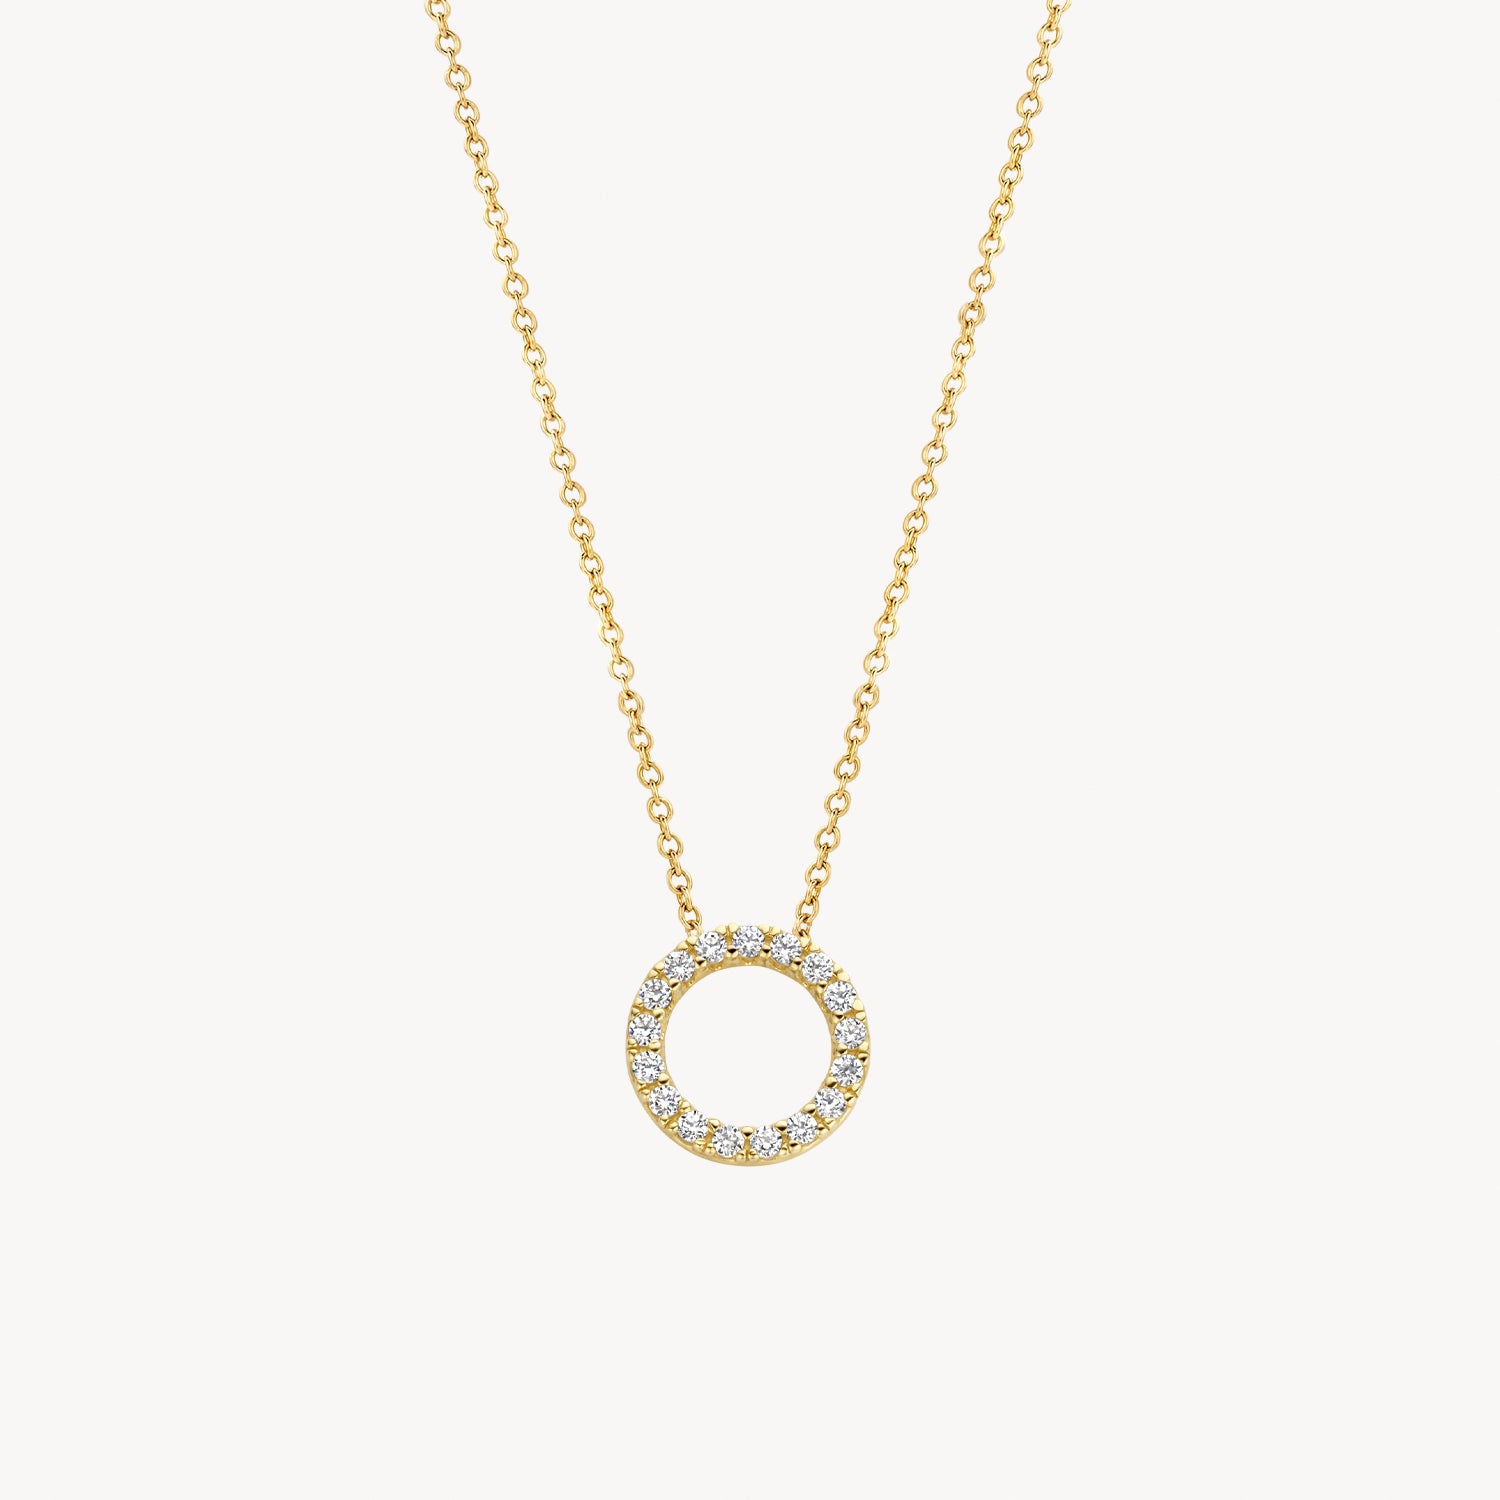 Necklace 3065BZI - 14k Gold and White Gold with Zirconia